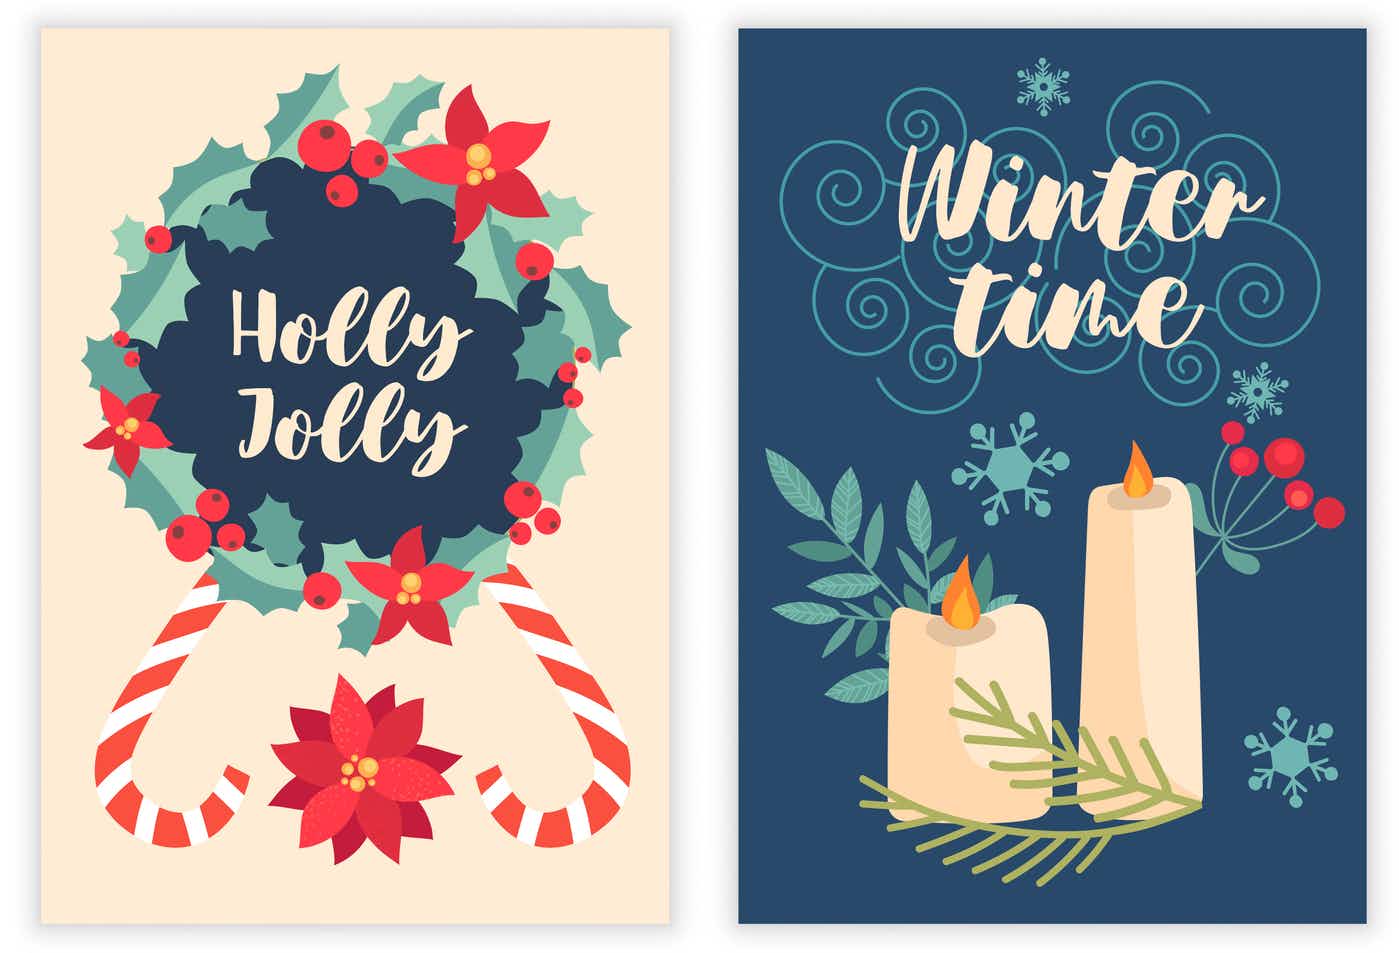 One holiday card that says holly jolly on the left and another that says winter time on the right